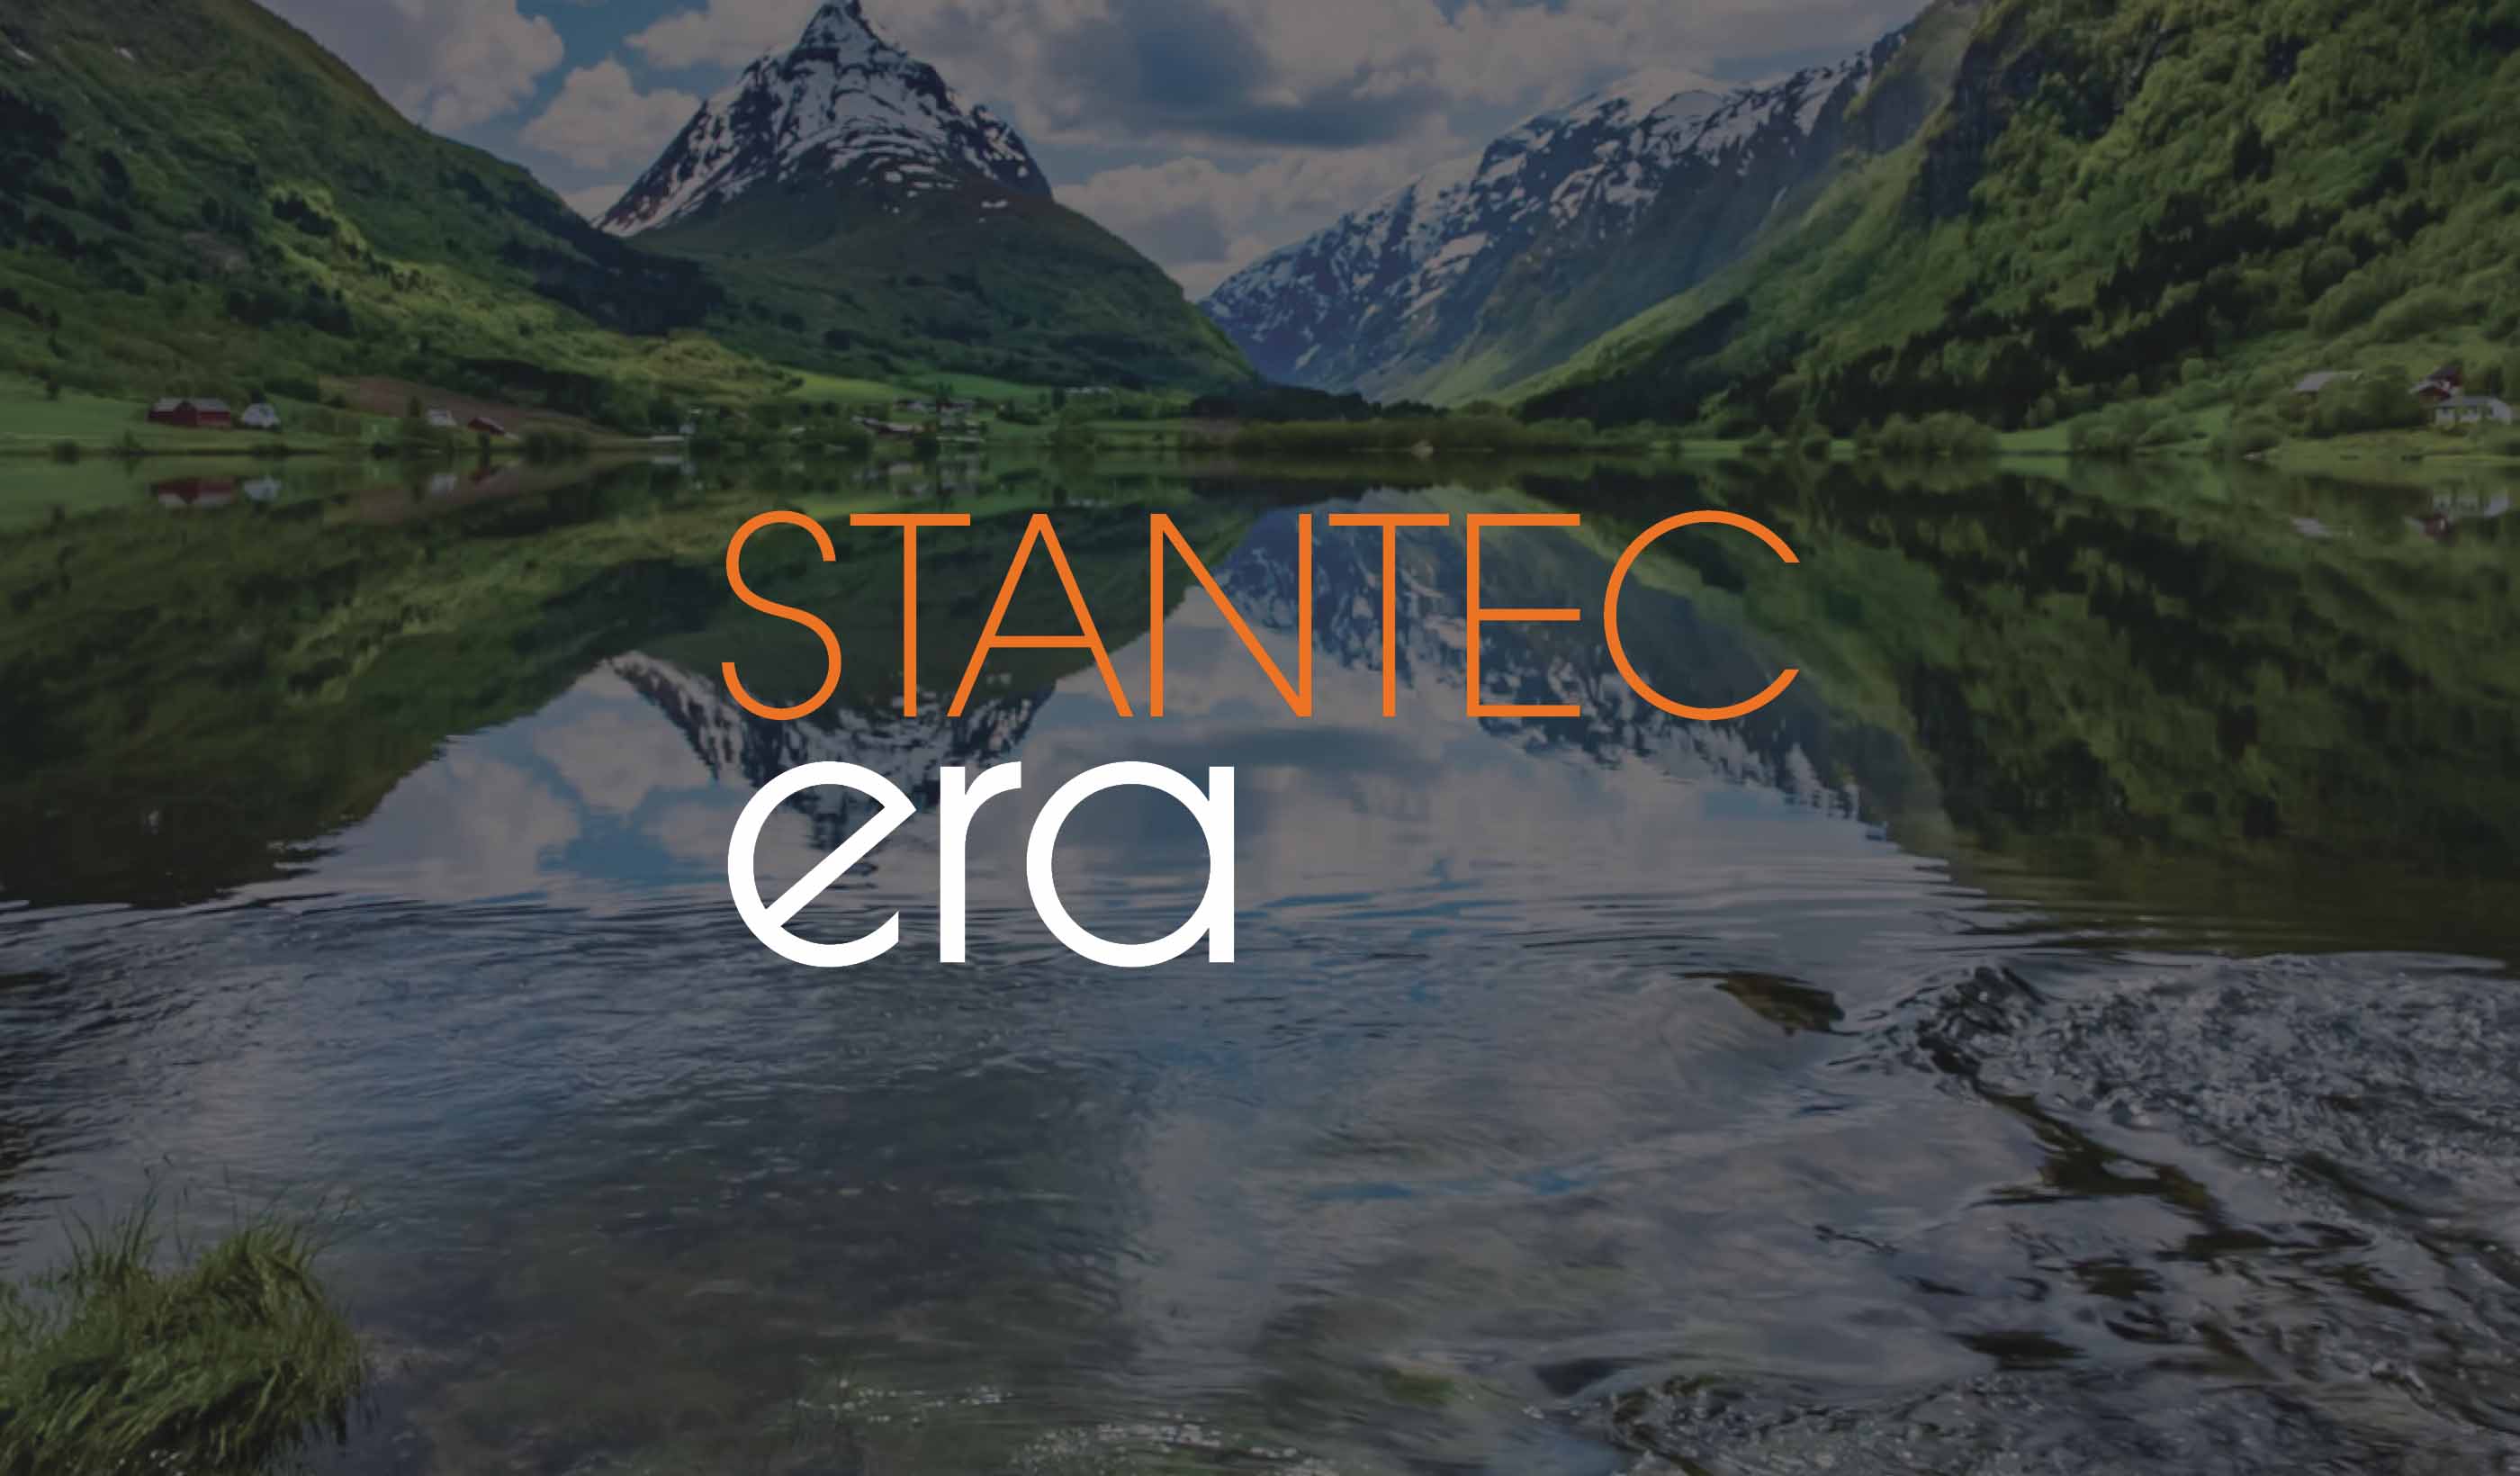 Stantec ERA Issue 5 | The Sustainability Issue